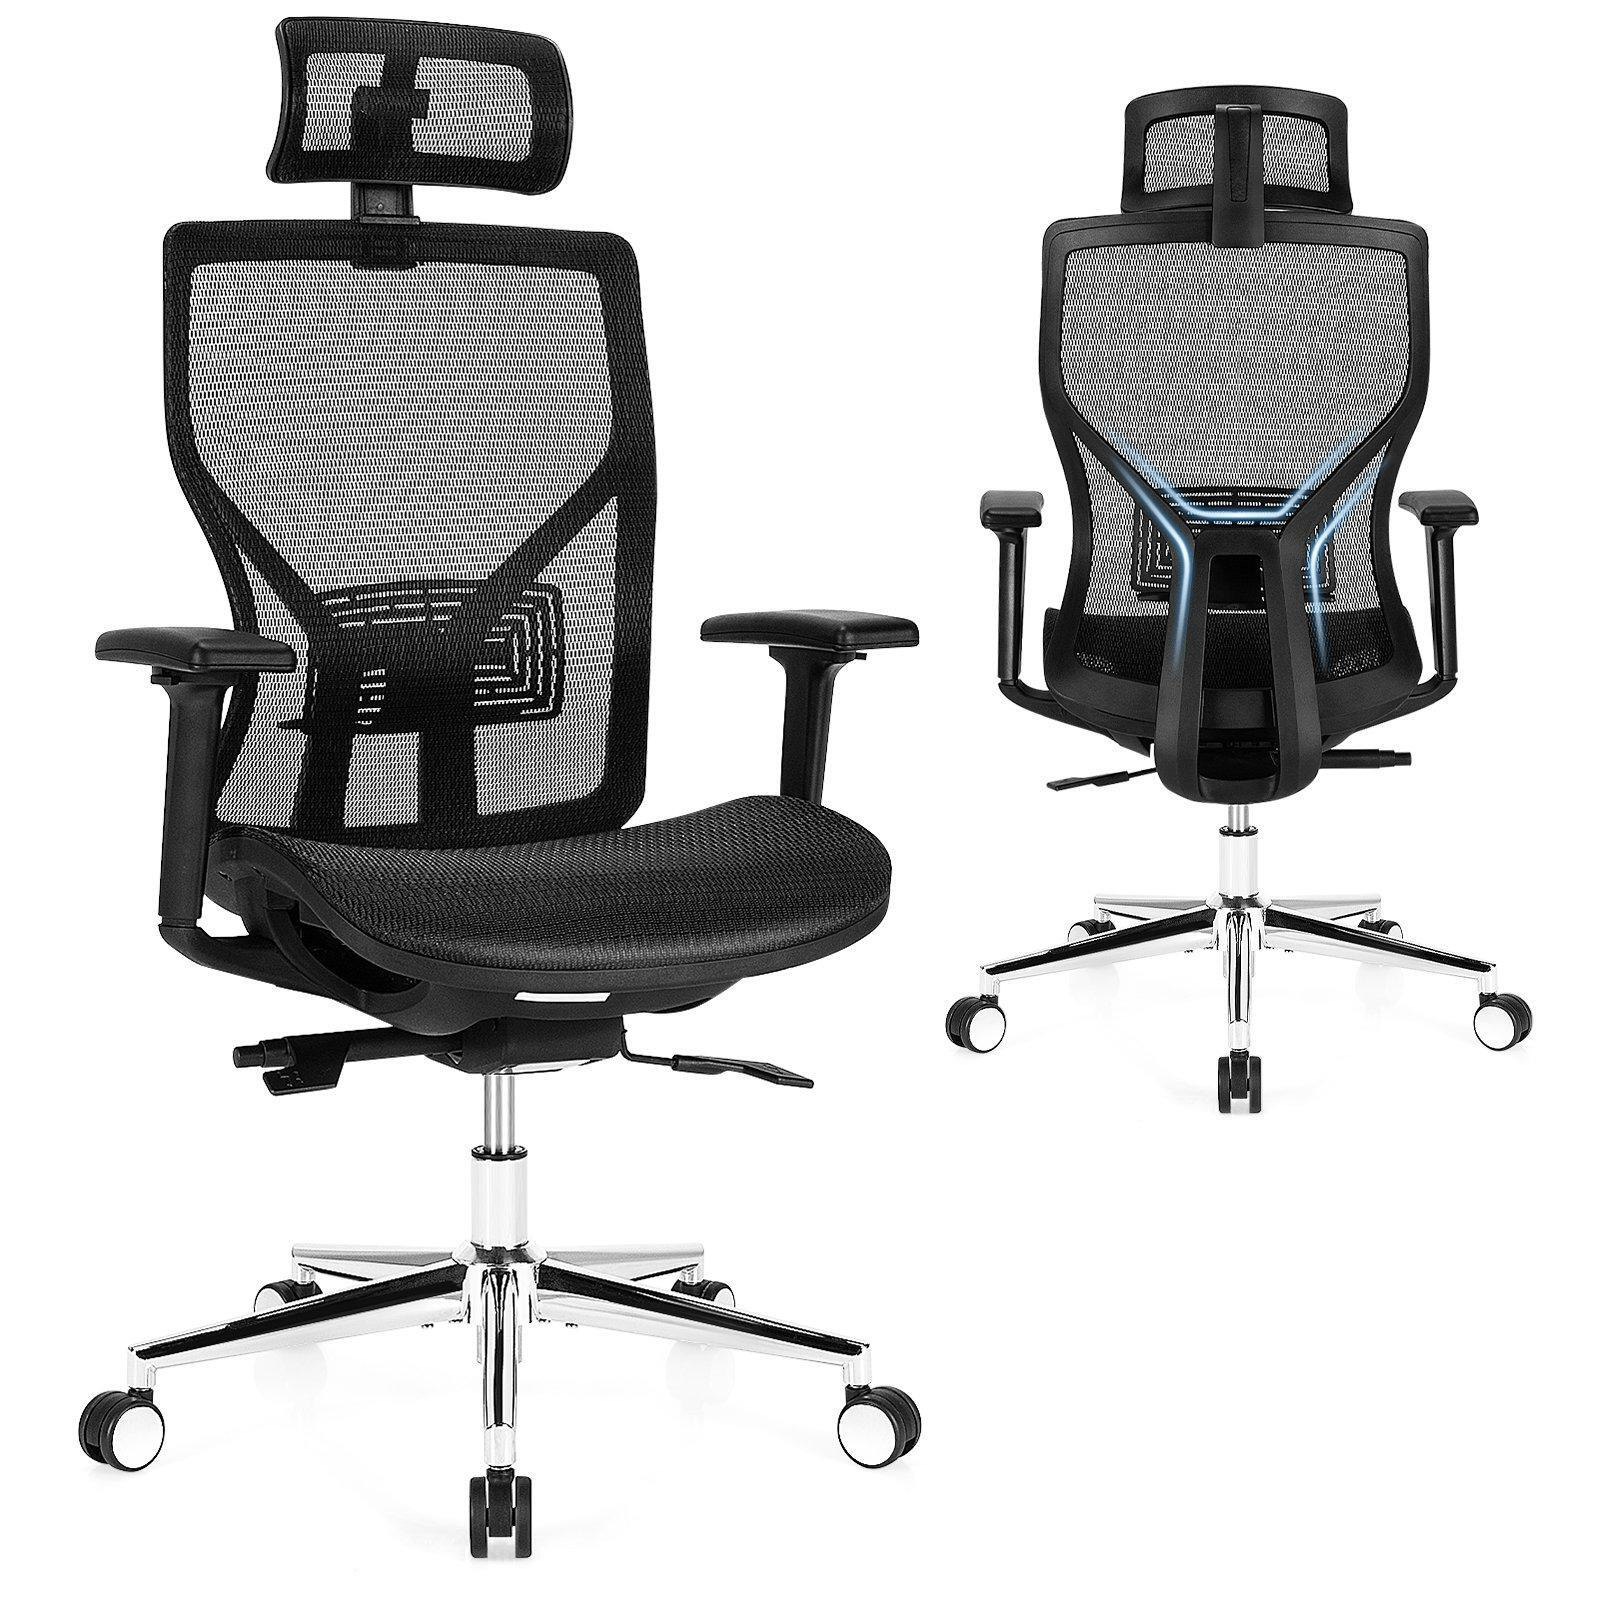 Ergonomic Office Chair High-Back Mesh Executive Chair Adjustable Lumbar Support - image 1